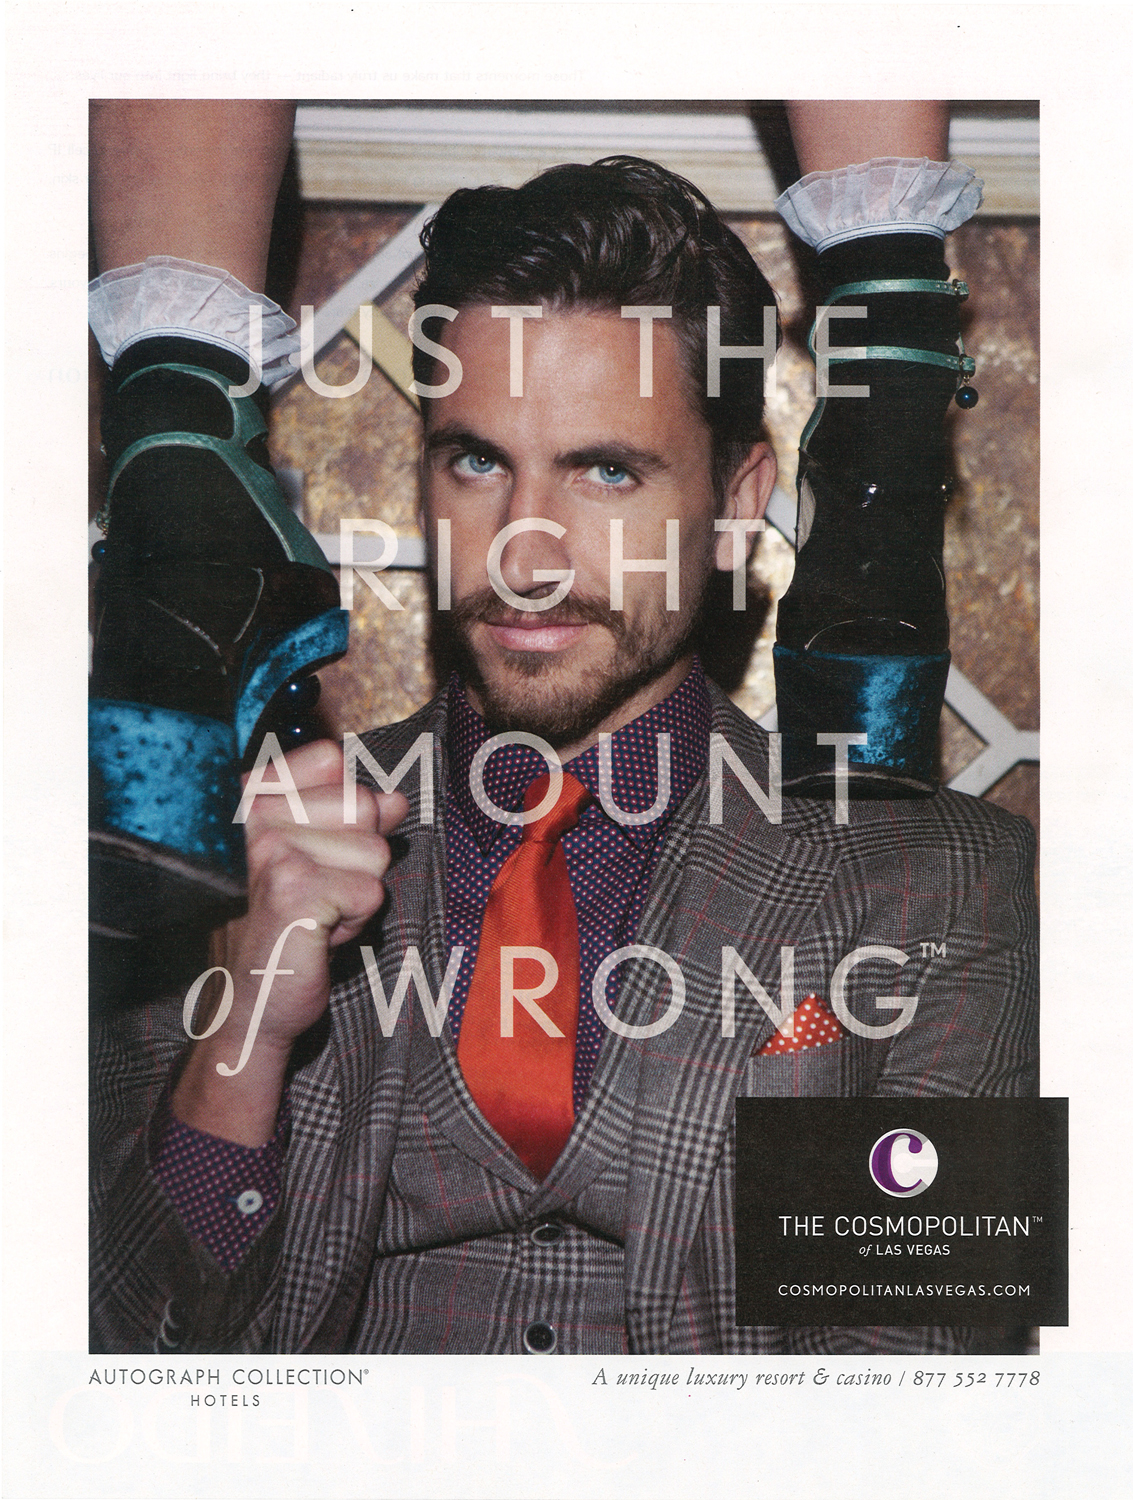 Print ad for The Cosmopolitan